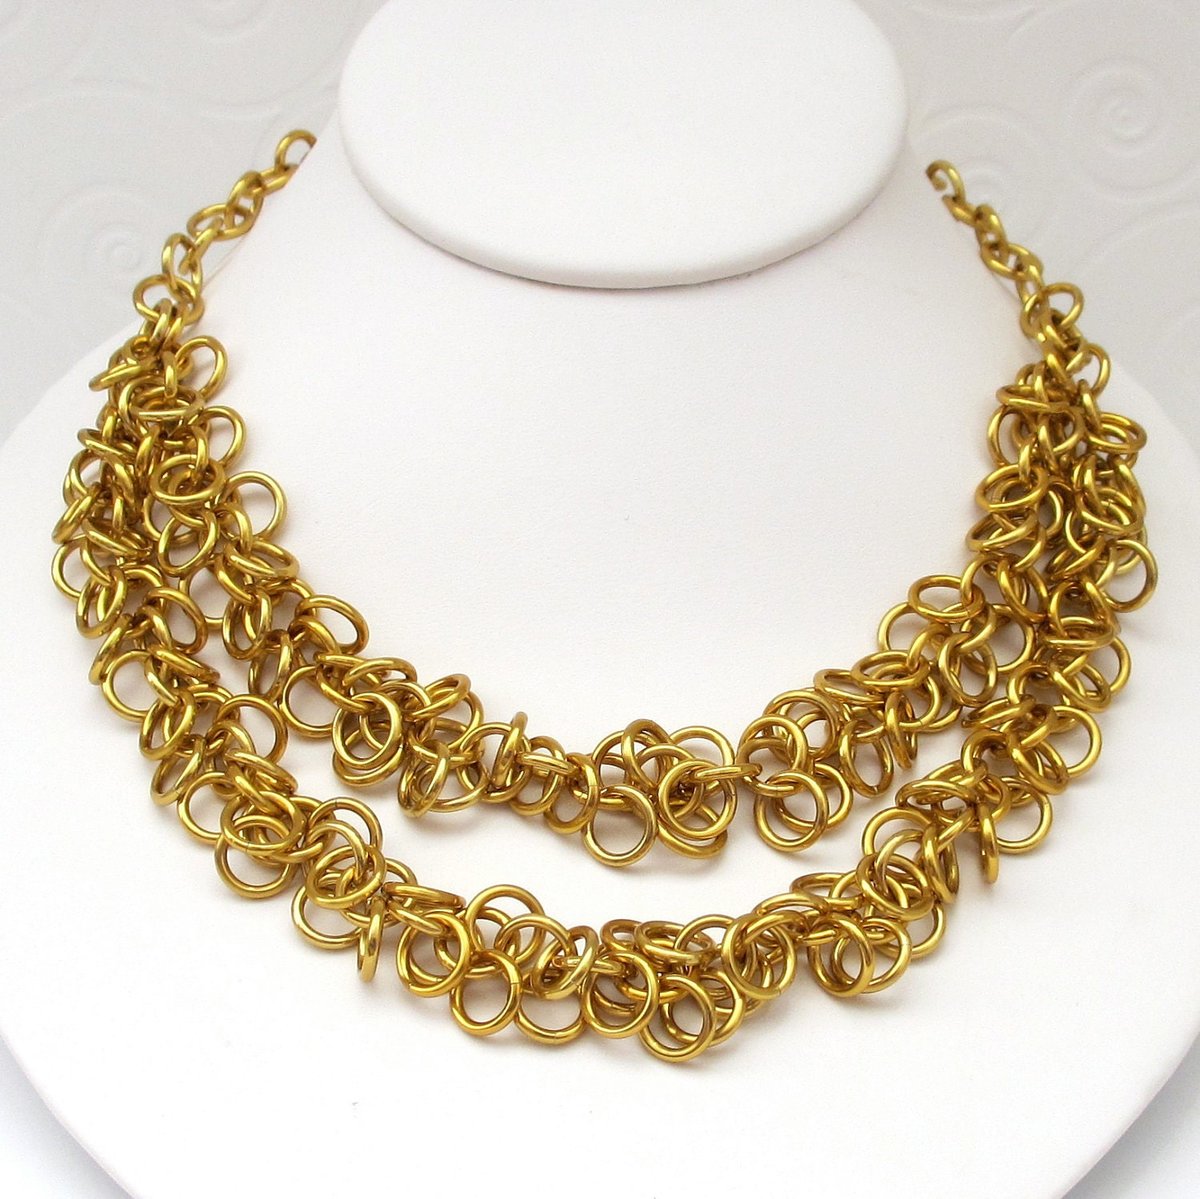 Clearance 40% off, Chainmaille shaggy loops necklace in gold aluminum